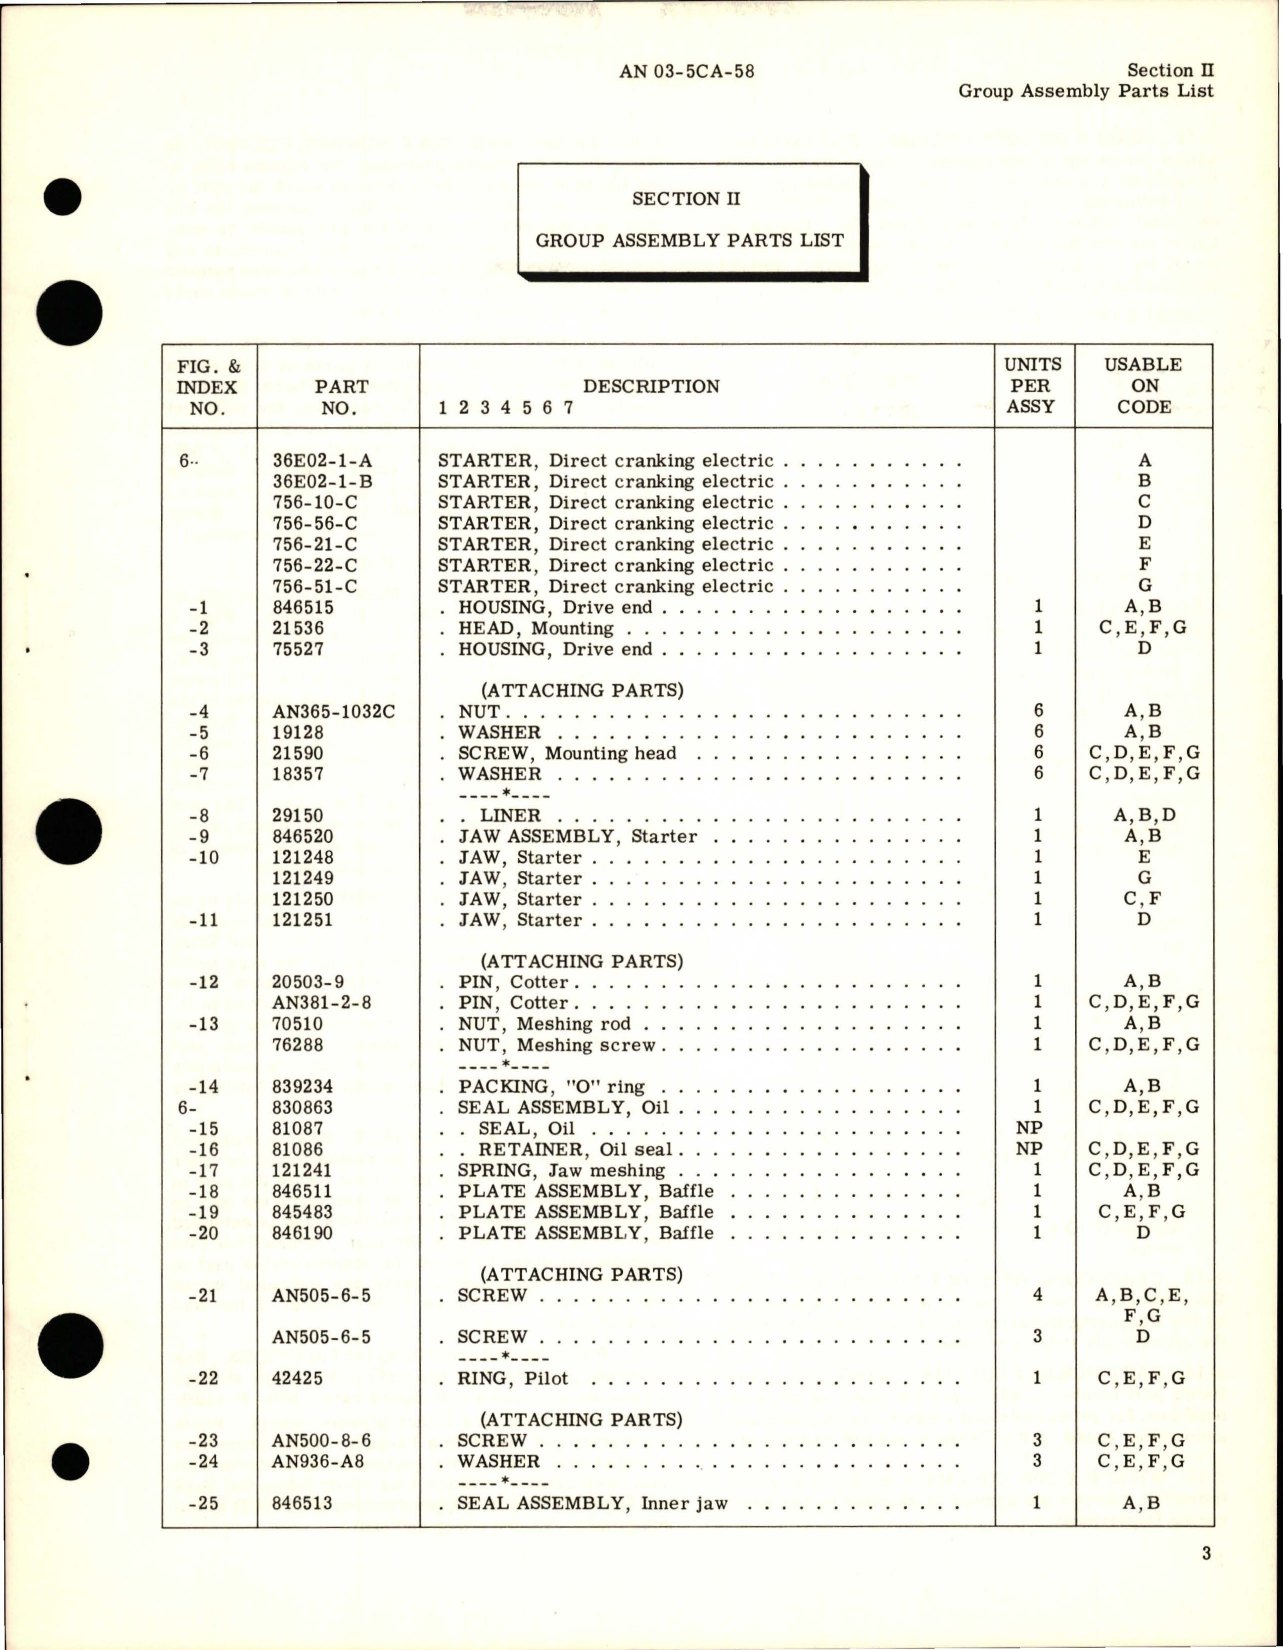 Sample page 7 from AirCorps Library document: Illustrated Parts Breakdown for Direct Cranking Electric Starters 